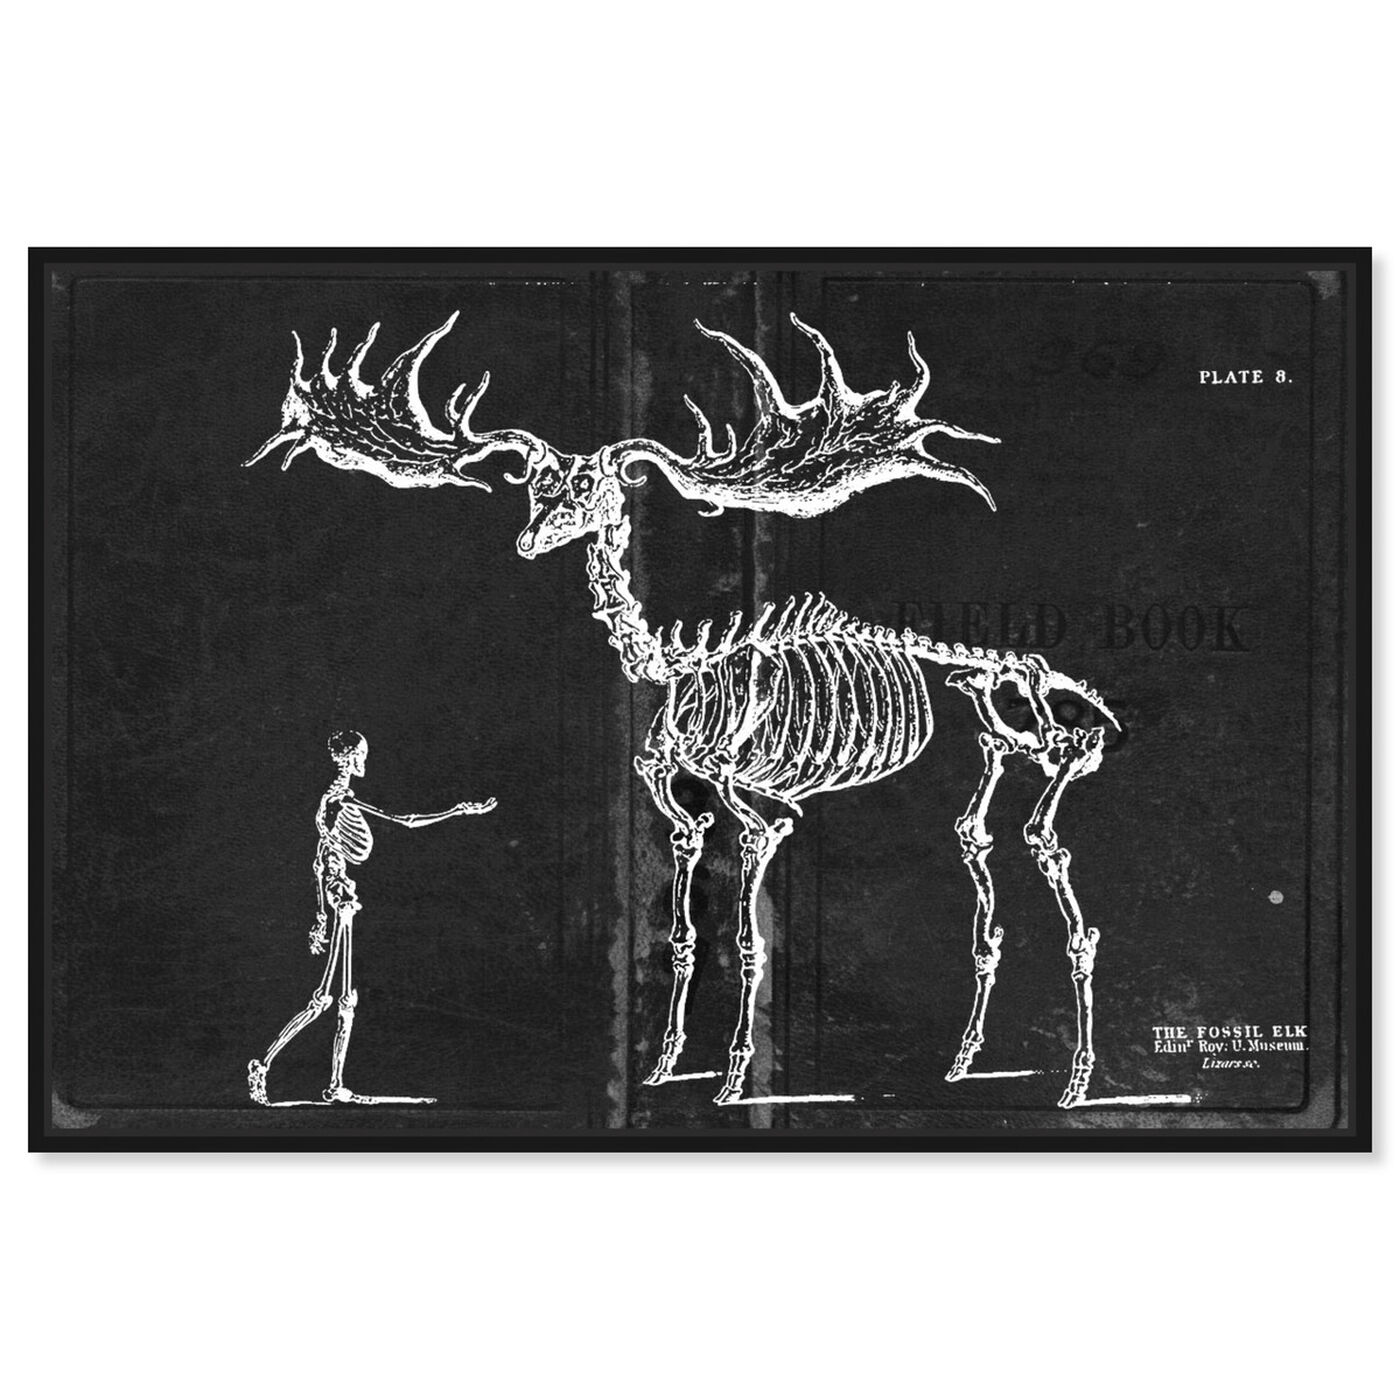 Front view of Fossil Elk 1830 featuring animals and skeletons art.